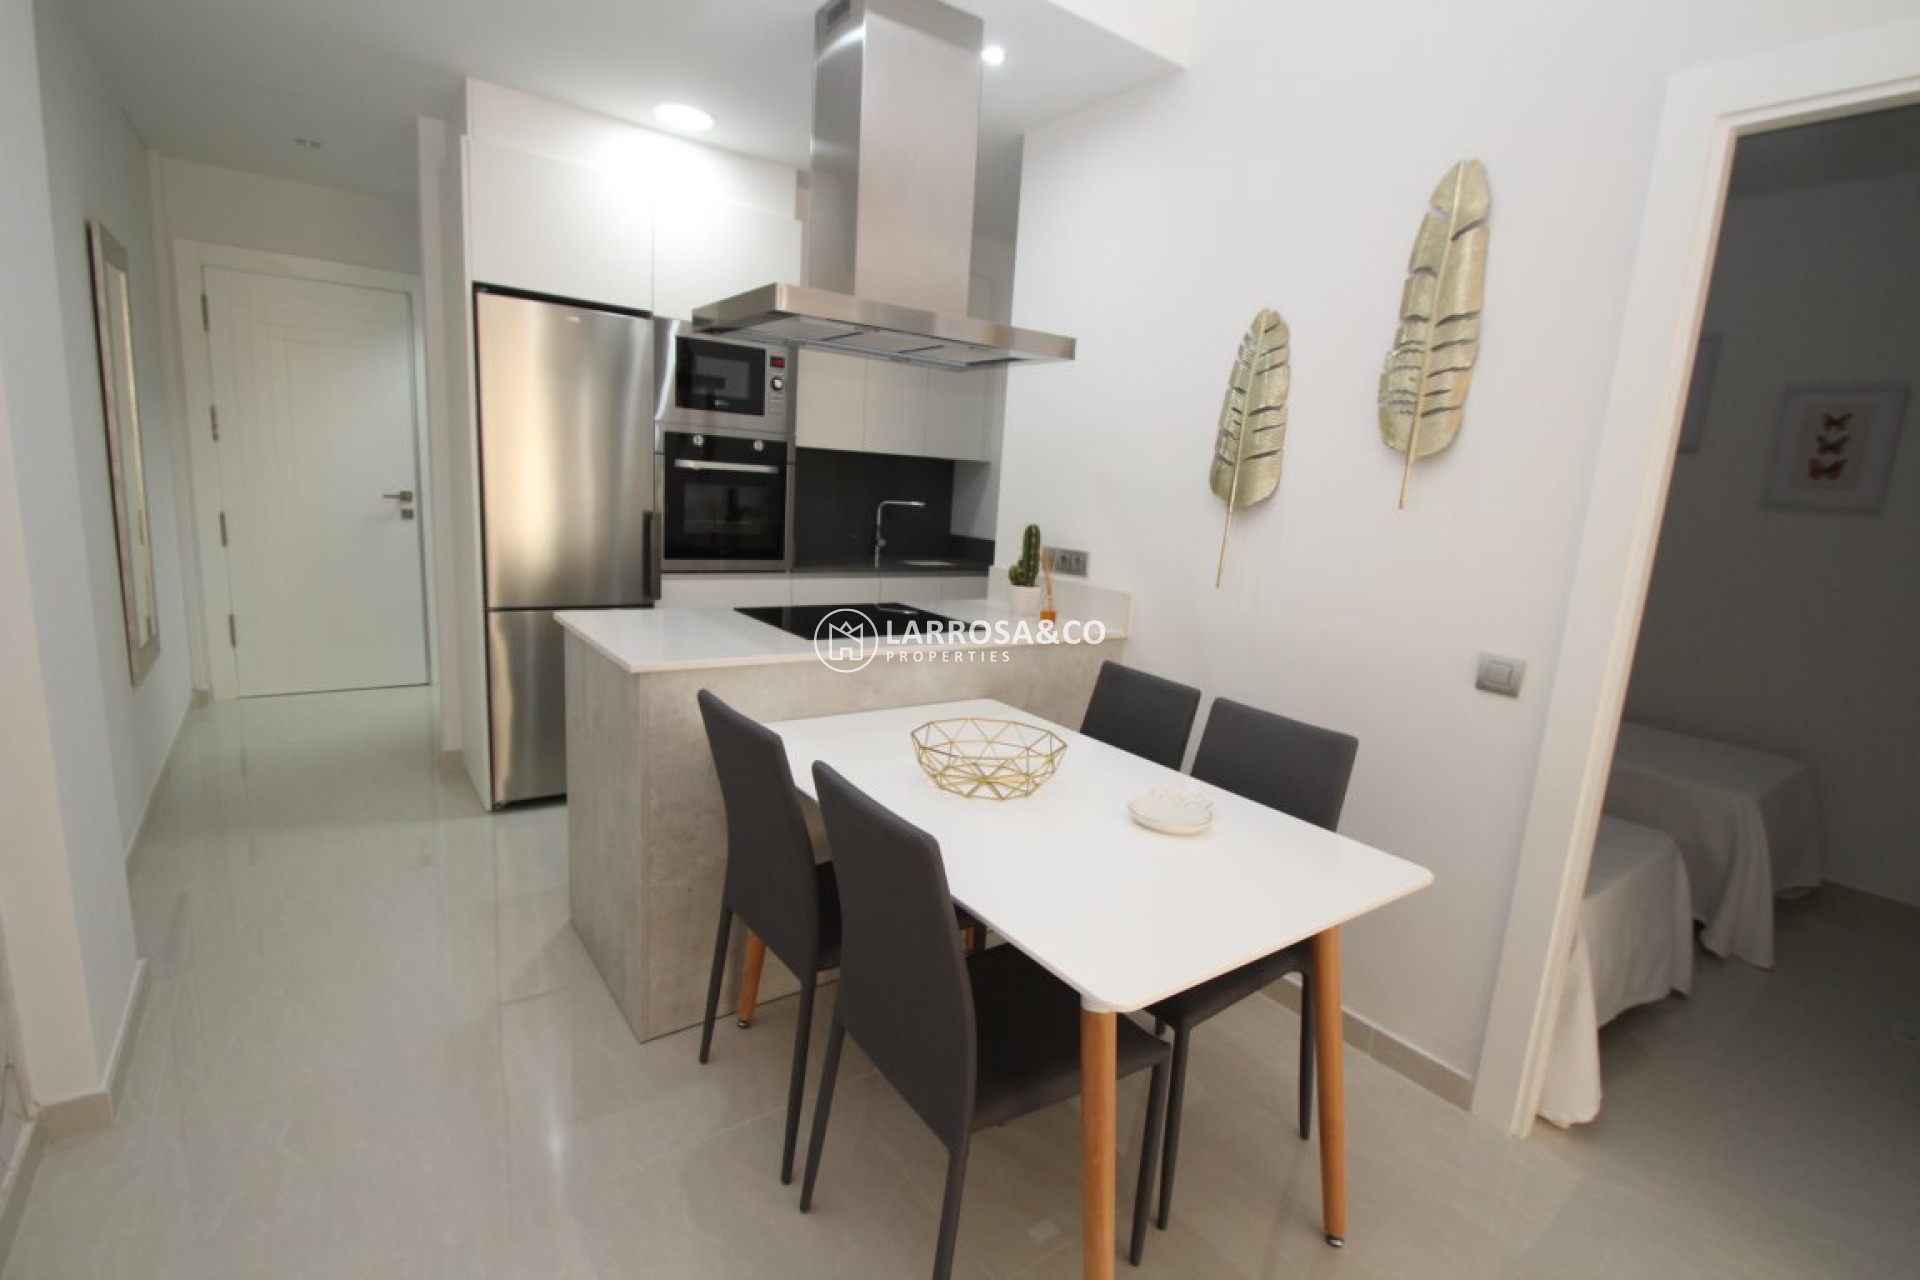 new-build-apartment-torrevieja-dining-room-kitchen-on2083